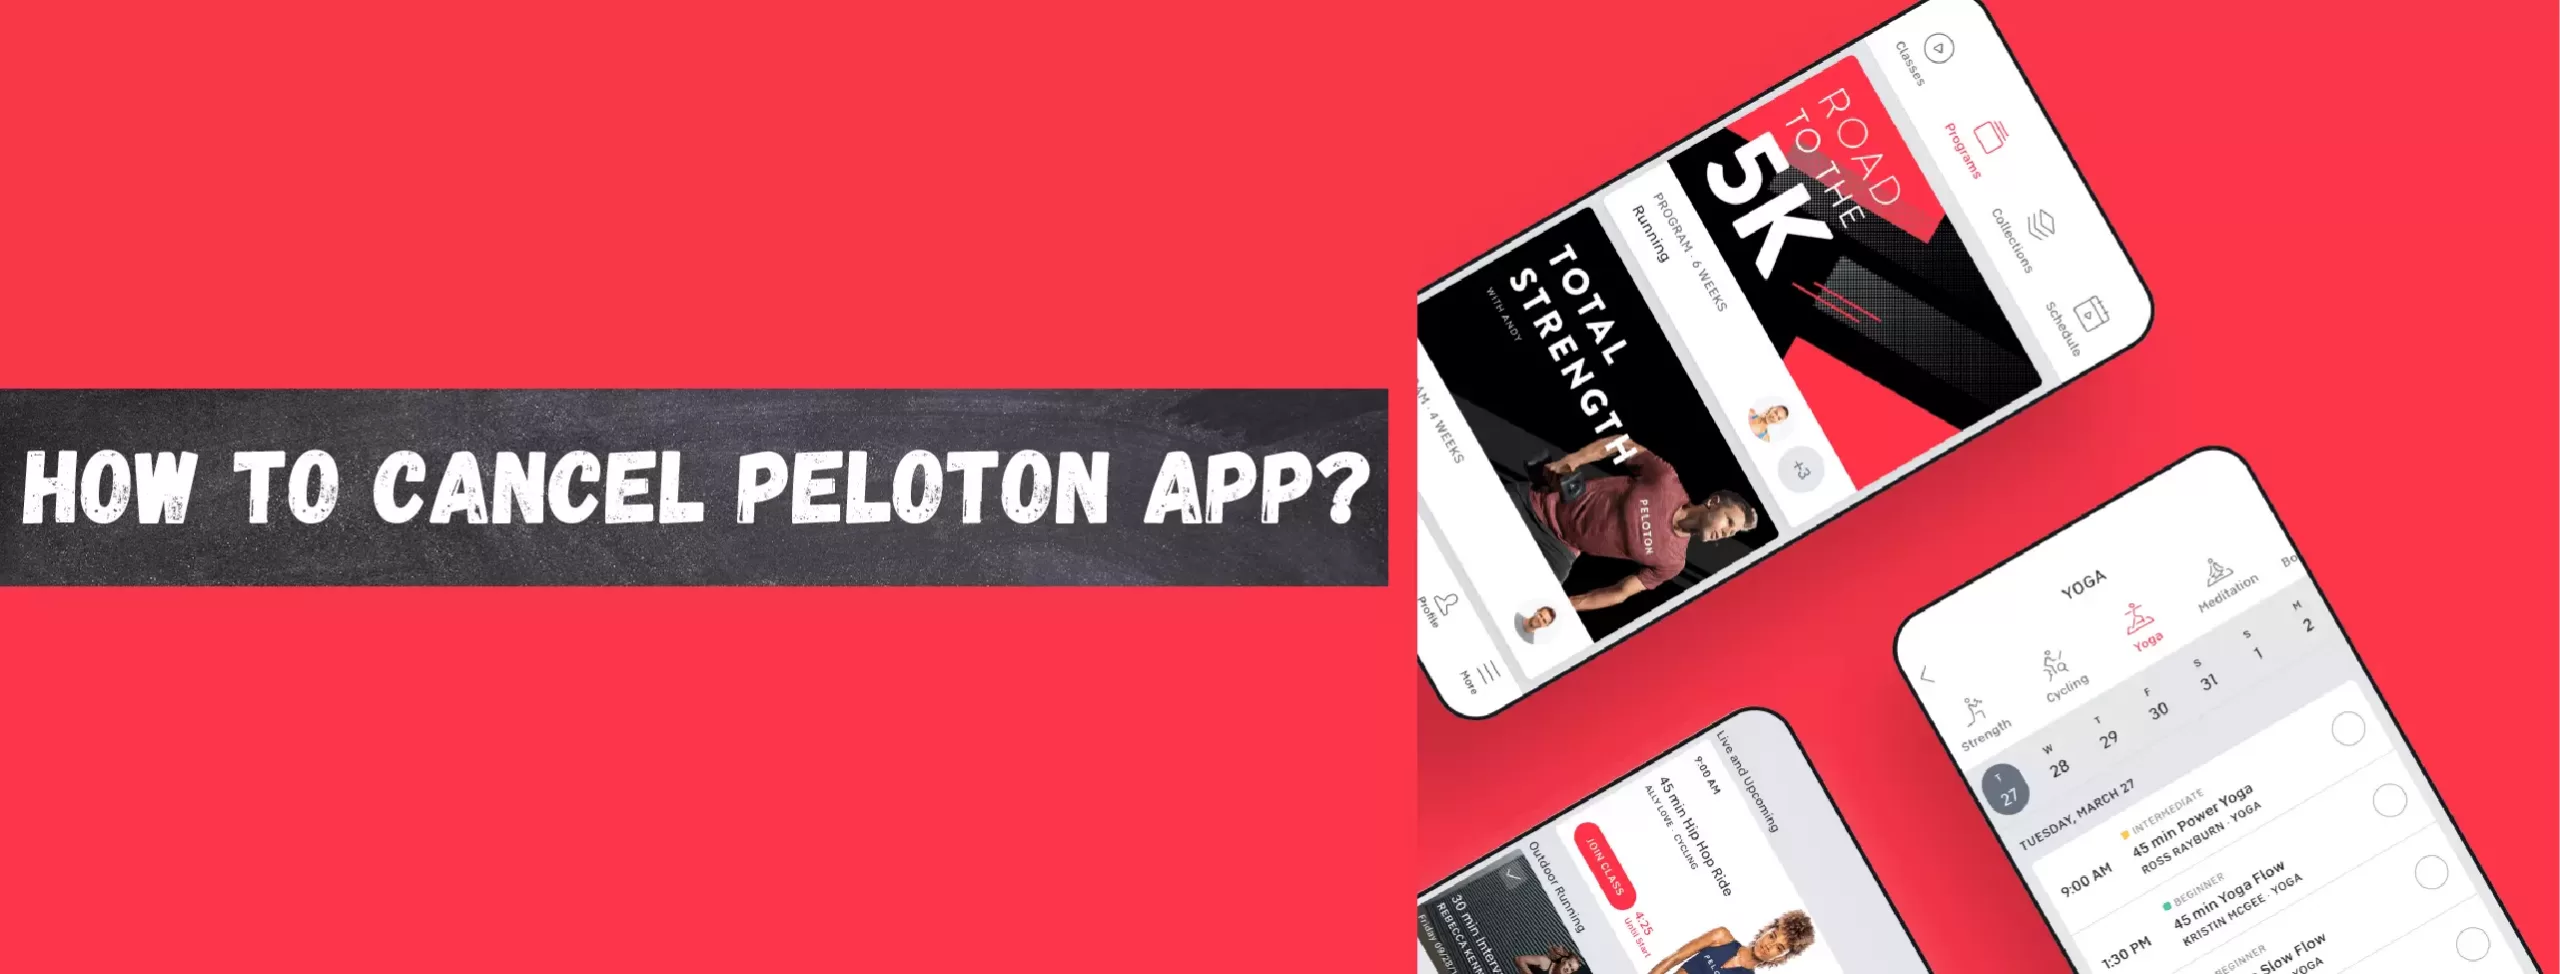 How To Cancel Peloton App?,how to unsubscribe from peloton app,how to cancel peloton app membership,how do i cancel my peloton app subscription,how to remove peloton workouts from apple watch,how to peloton app on tv,how to remove peloton from health app,how to cancel peloton subscription through apple,how to cancel peloton app subscription,How To Cancel Peloton App,how to cancel peloton app on iphone,how to cancel peloton subscription on iphone,how to cancel peloton membership on iphone,cancel peloton,how to cancel peloton subscription app,how to cancel the peloton app